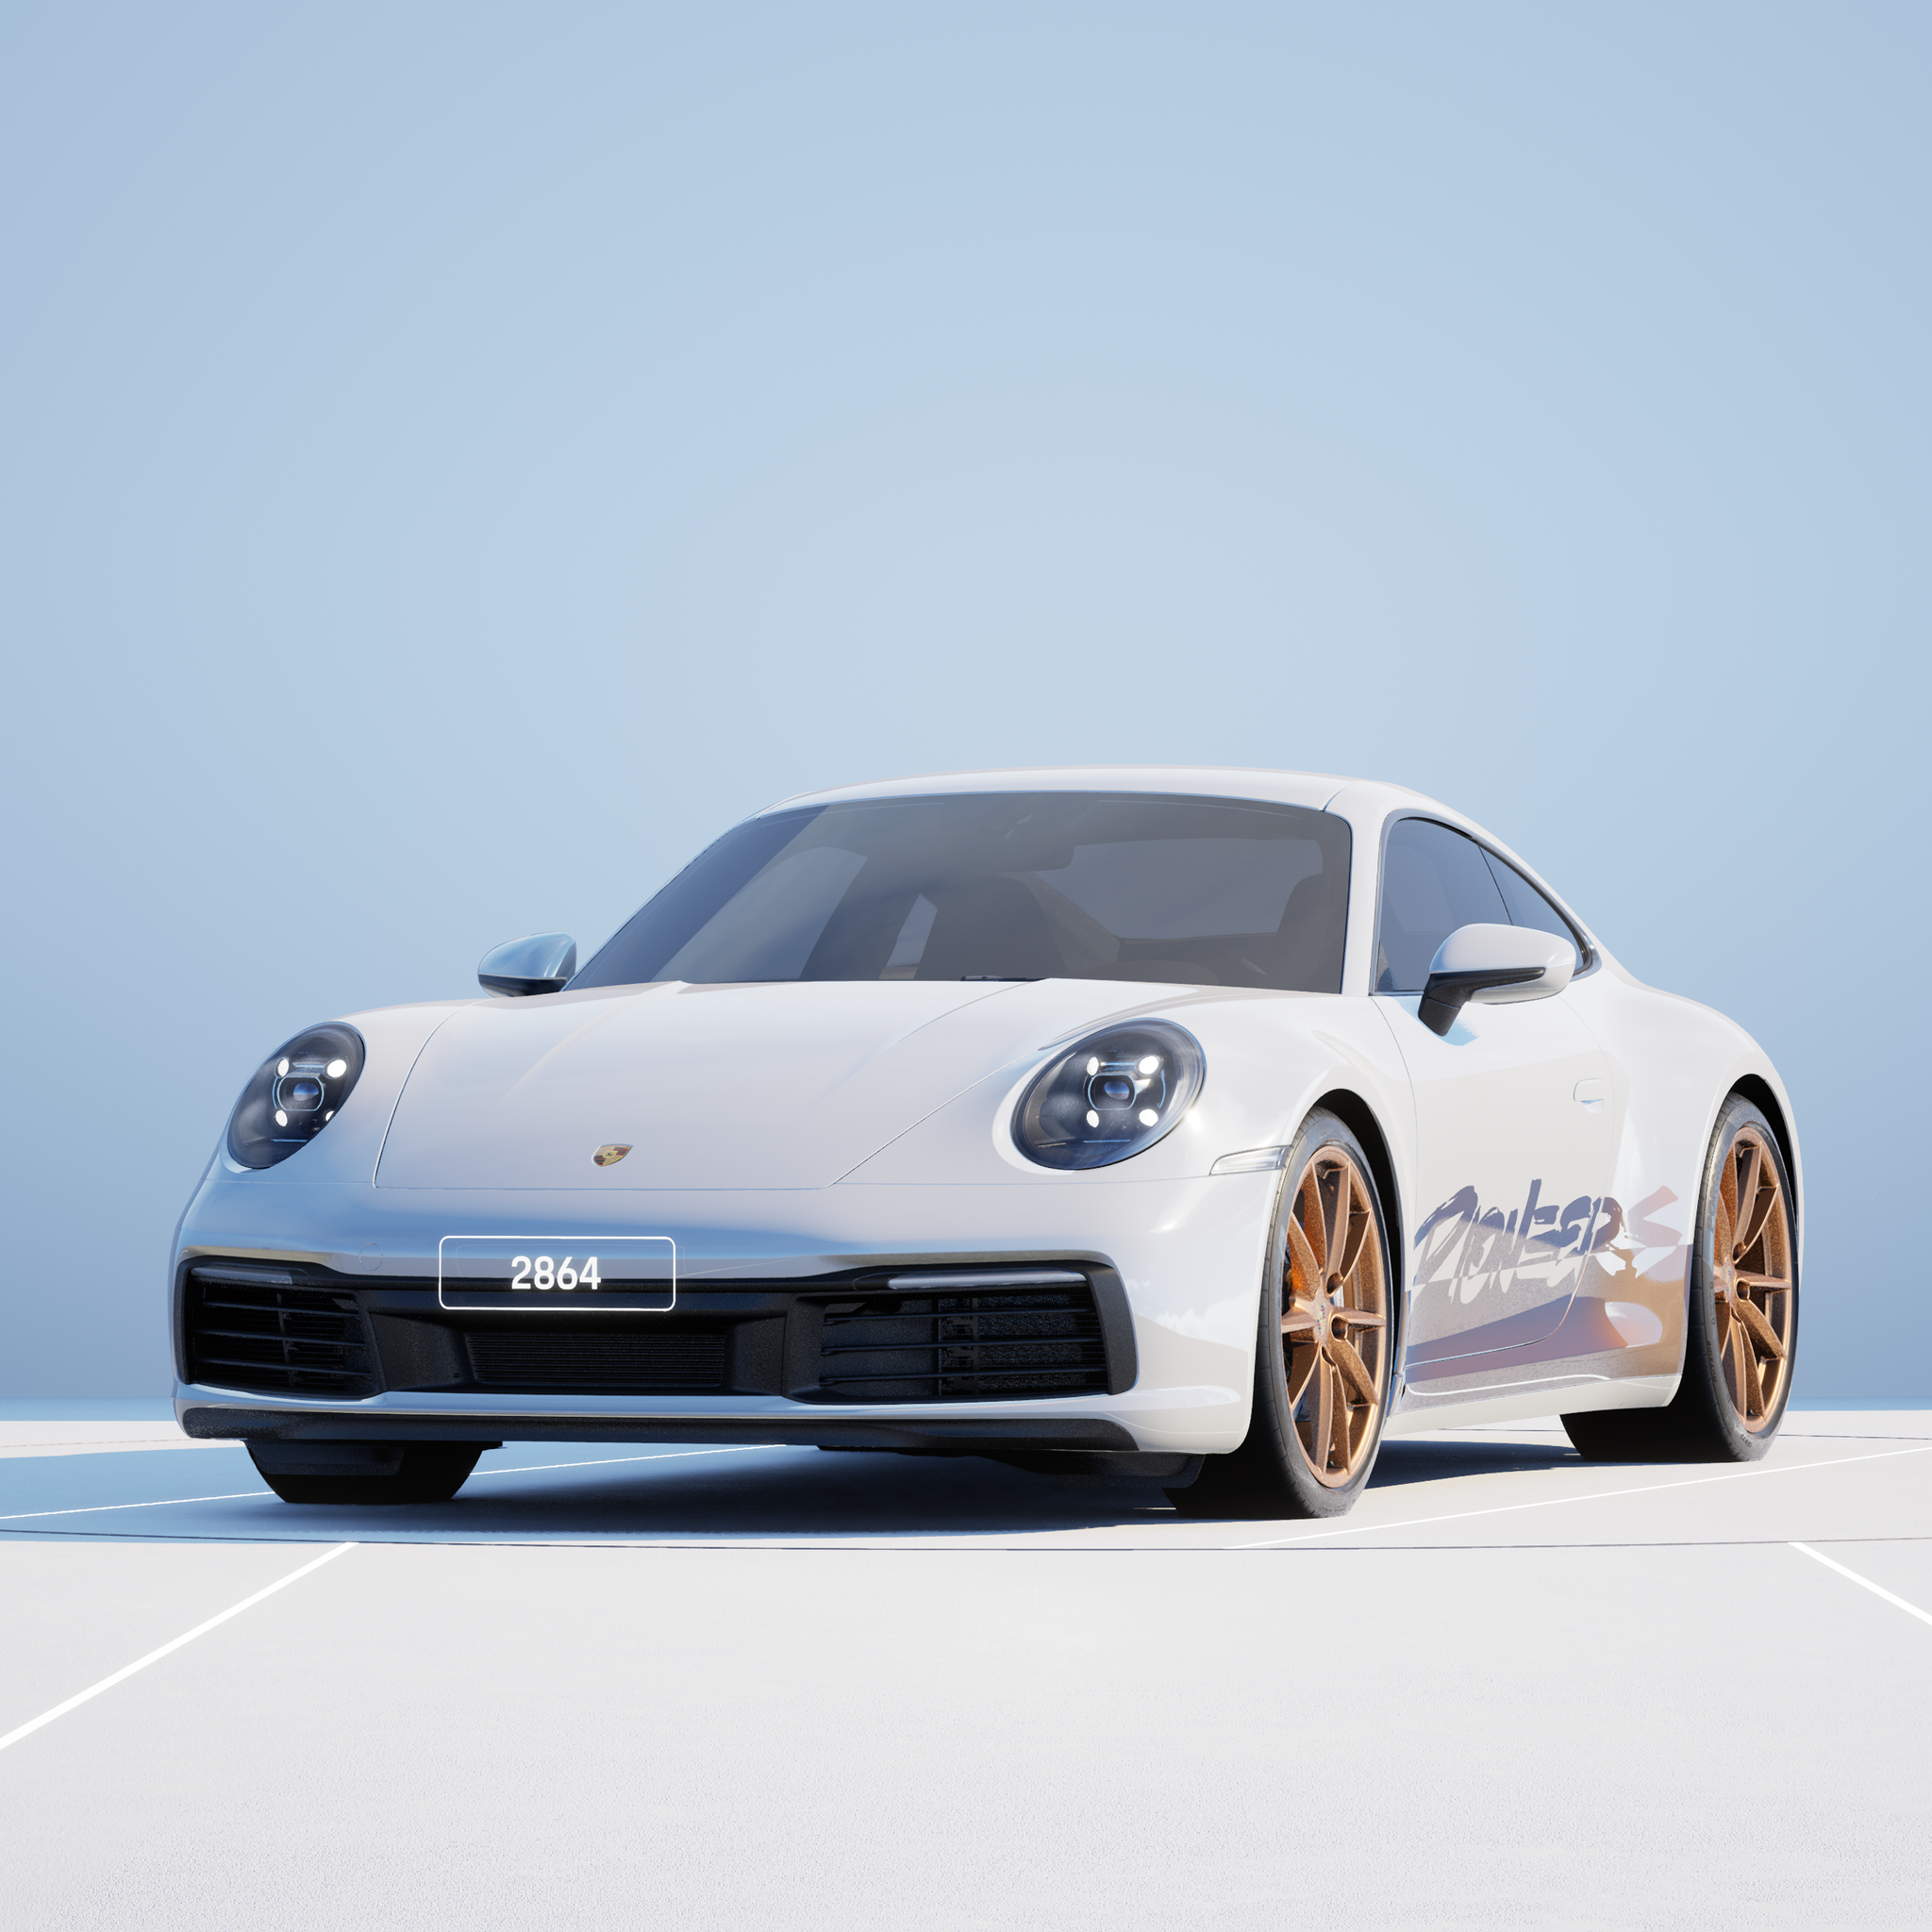 The PORSCHΞ 911 2864 image in phase